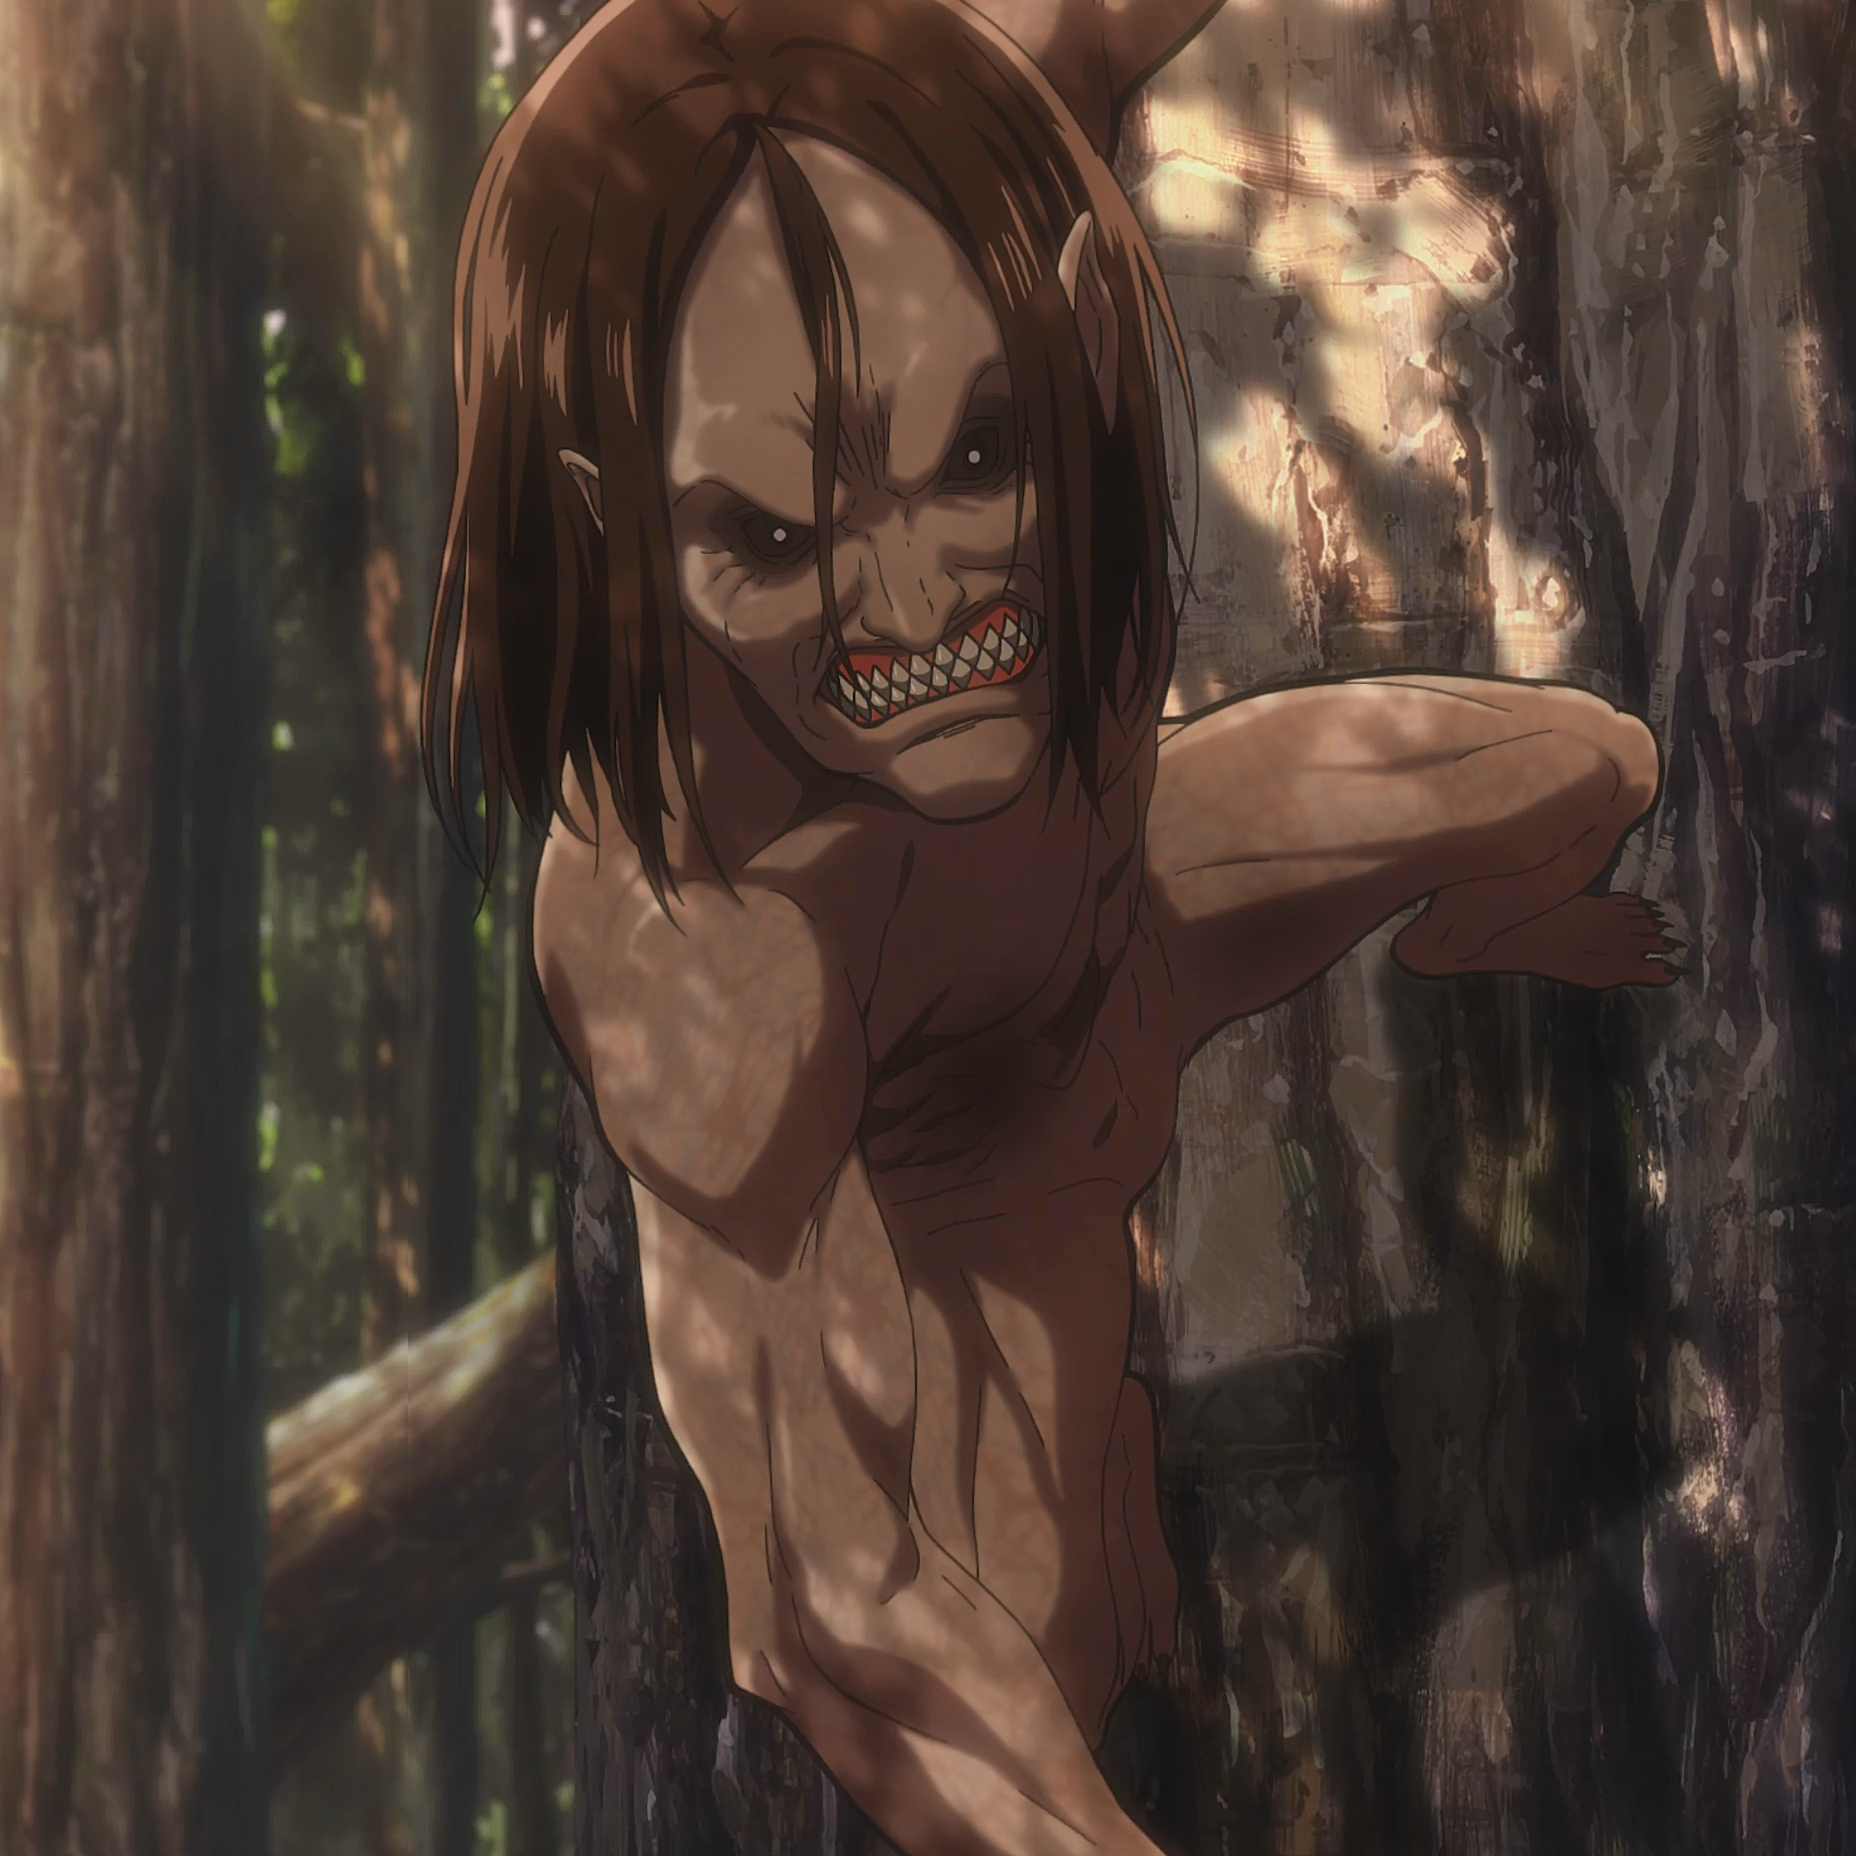 Jaw_Titan__Anime__character_image__Ymir_.png